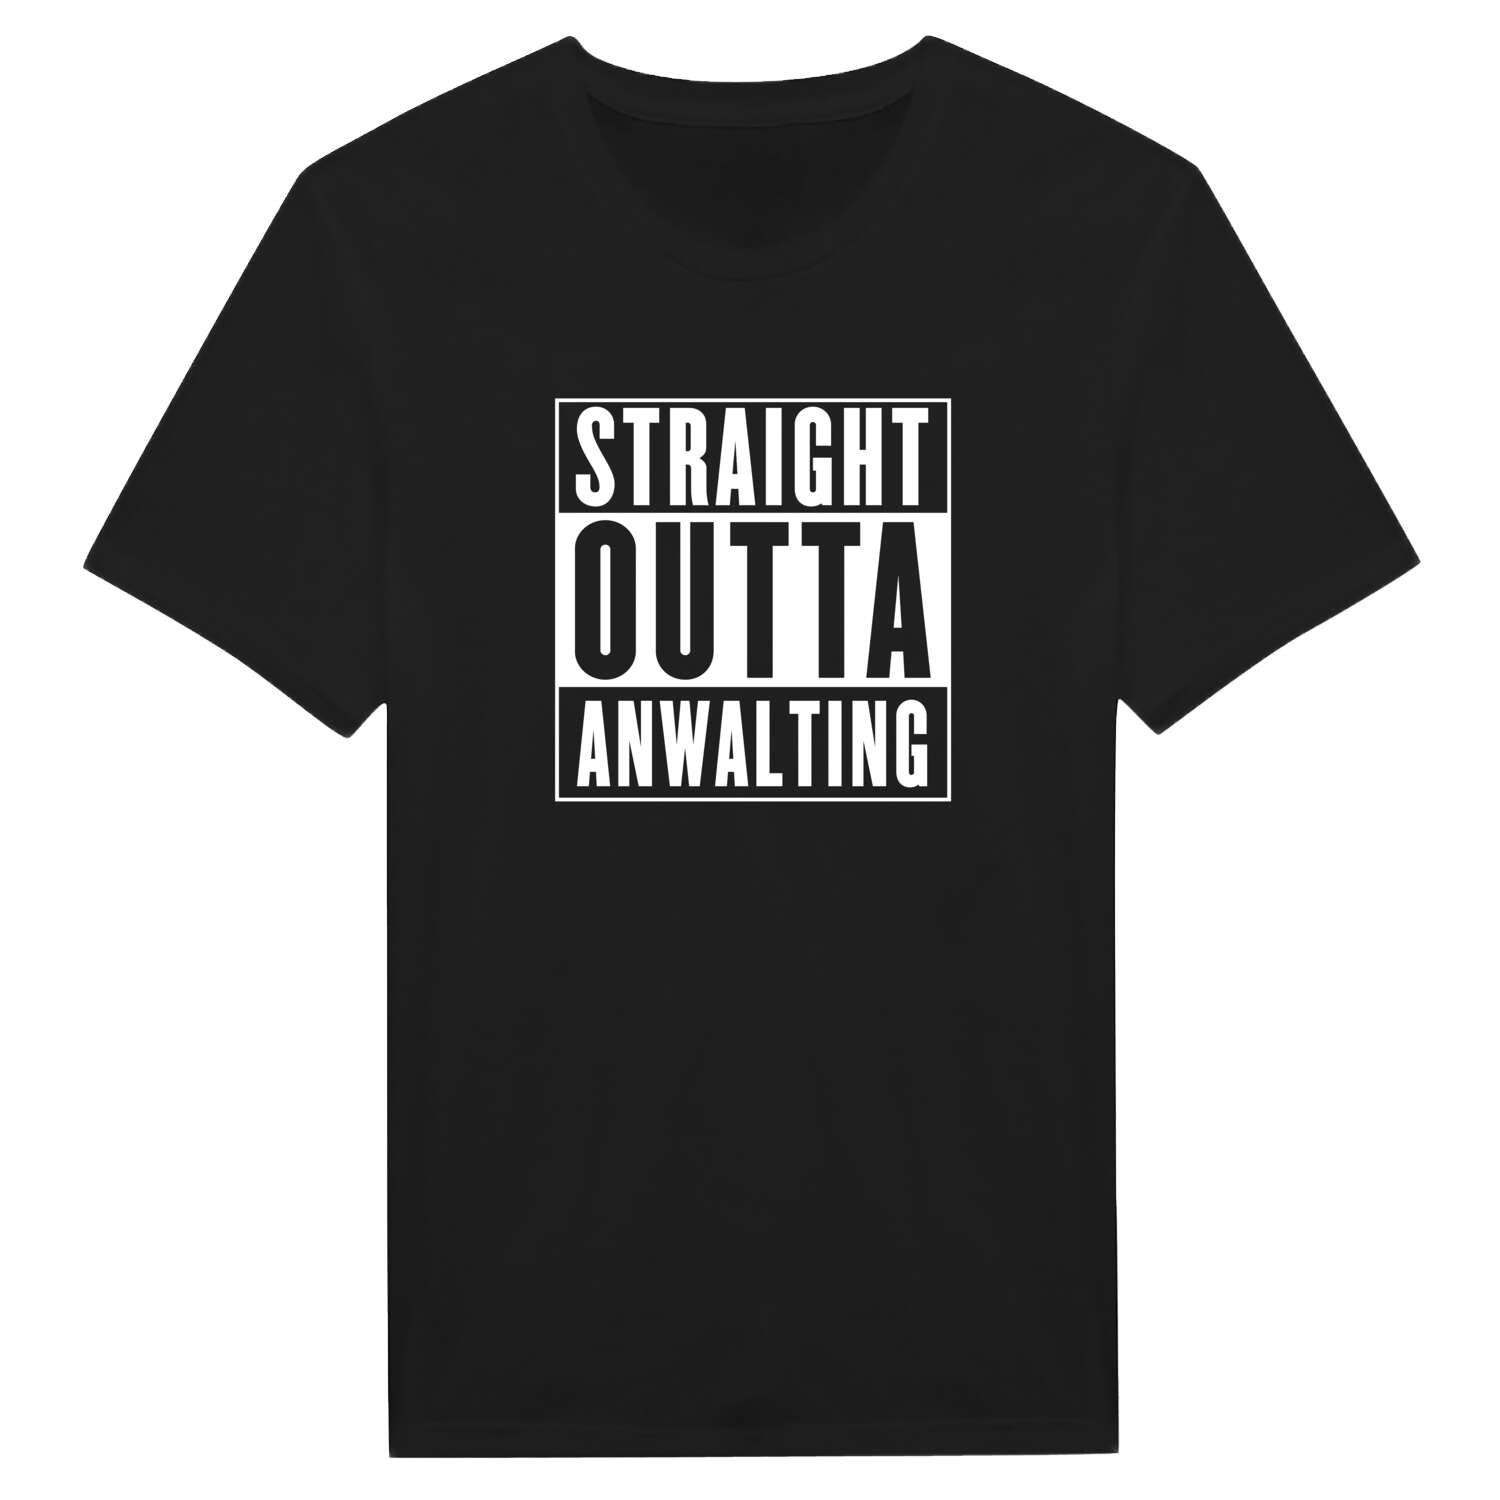 Anwalting T-Shirt »Straight Outta«